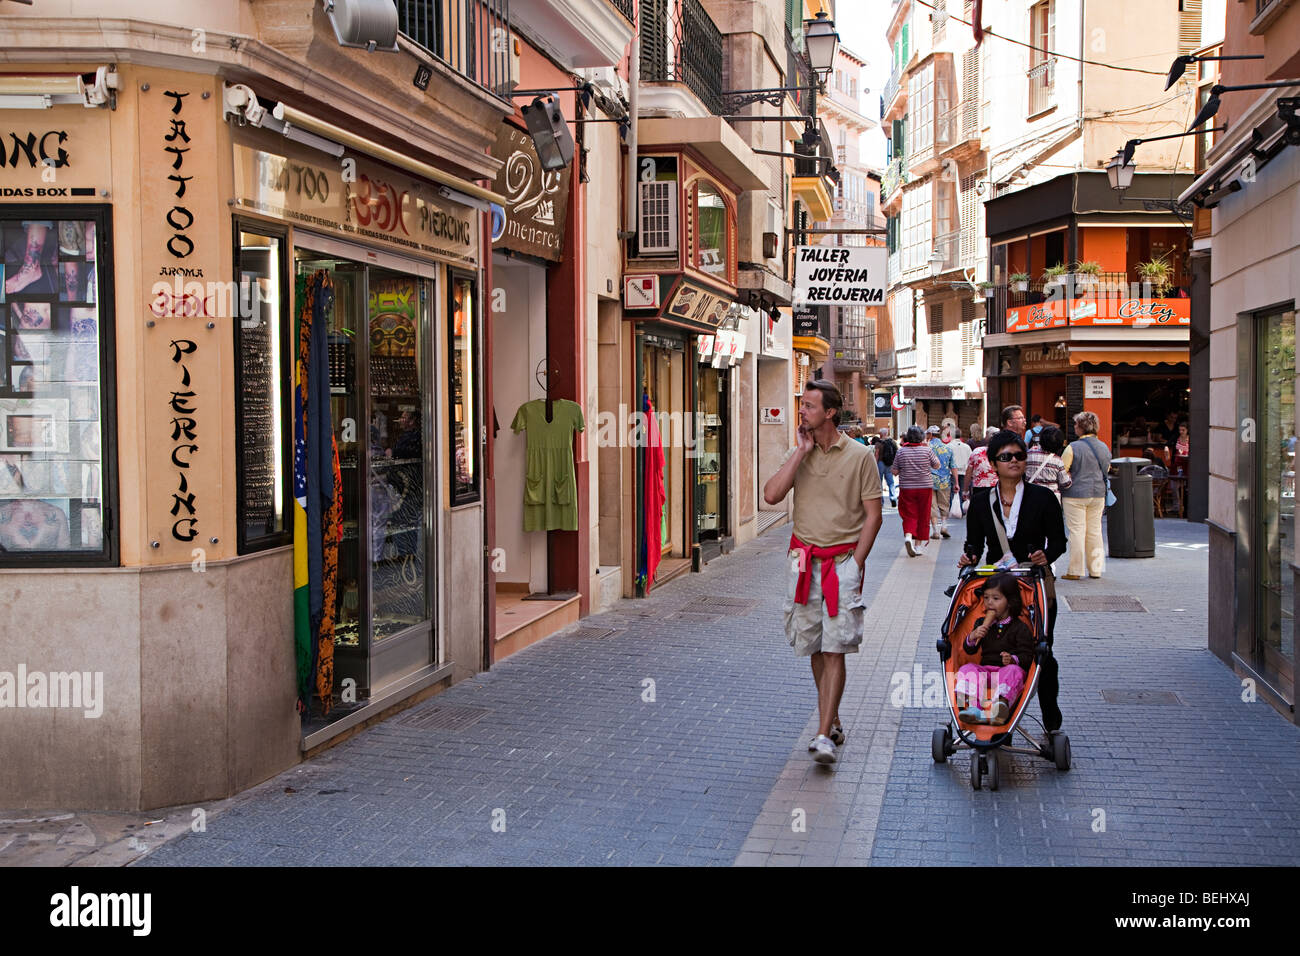 People in shopping street outside tattoo piercing sign Palma Mallorca Spain  Stock Photo - Alamy